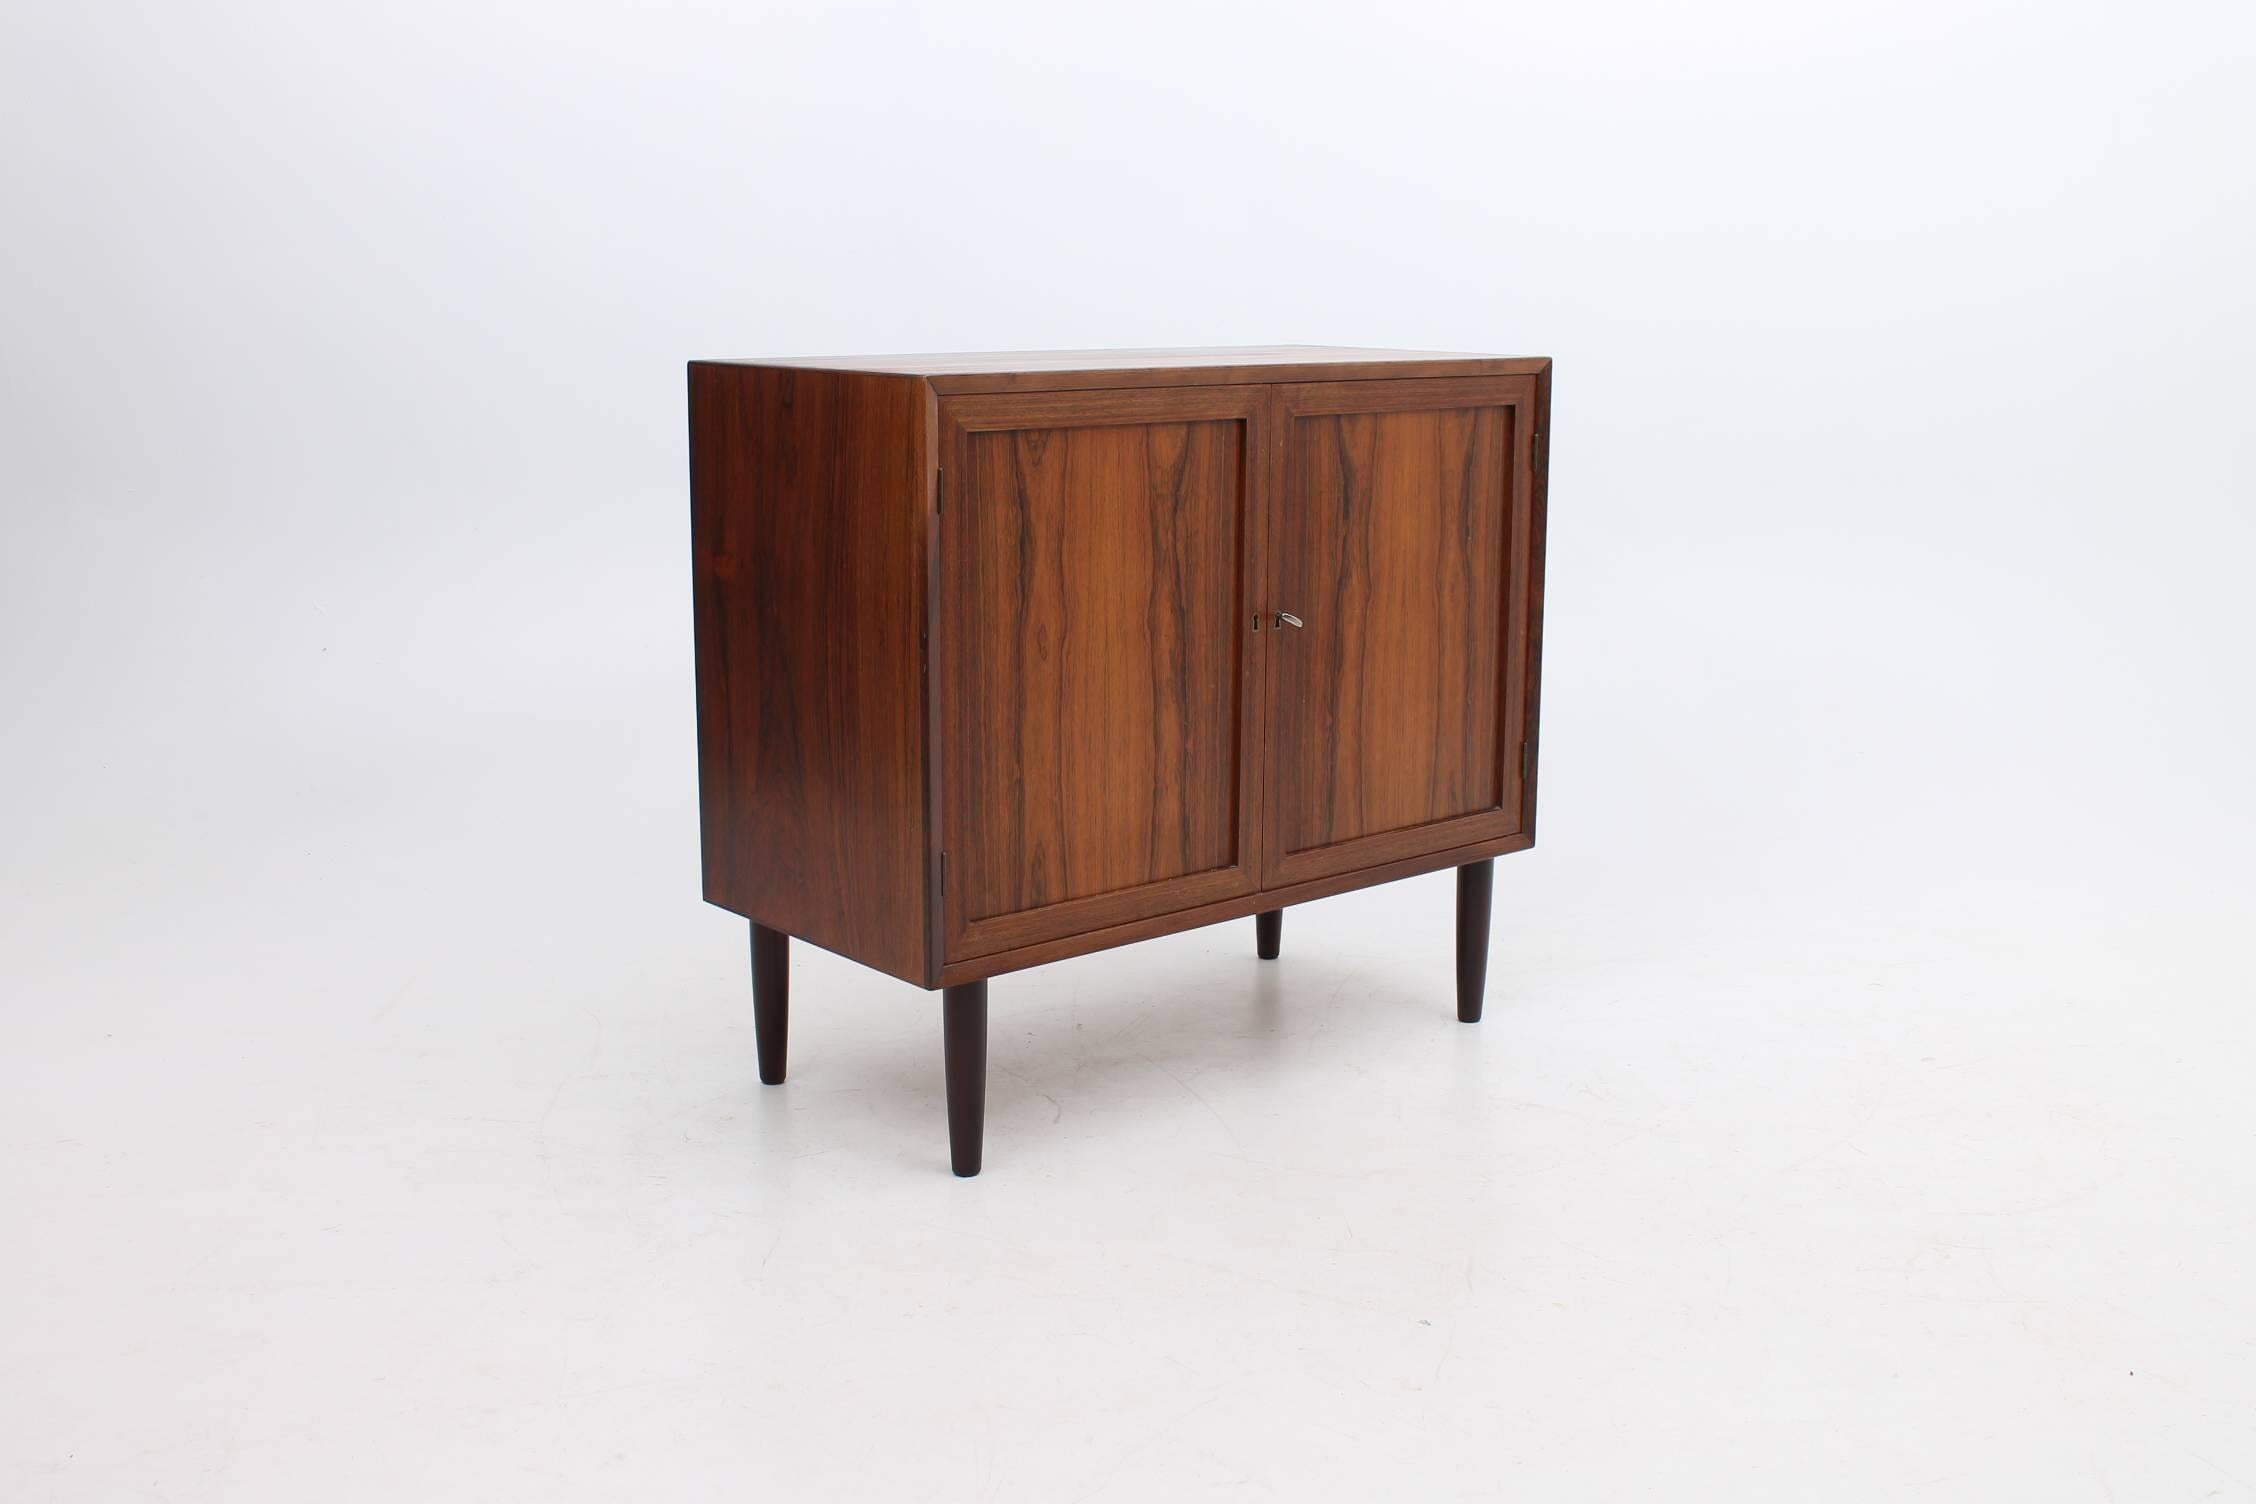 Small size cabinet designed by Lyby Møbler made of rosewood. This cabinet has a lock and key to open either one of the doors. The shelf inside is adjustable to accommodate many different items of different sizes and heights. This cabinet would work